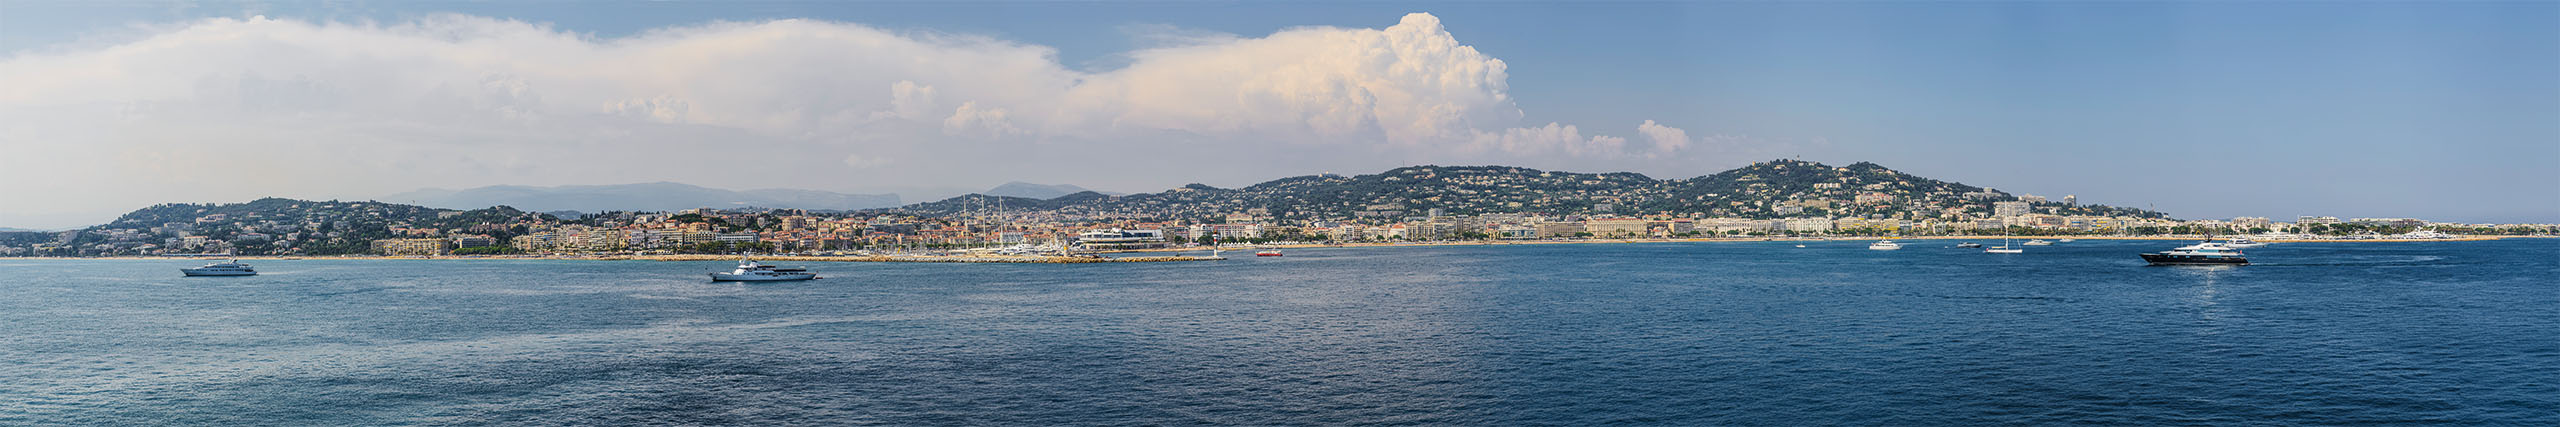 Cannes - Panorama 7_6-1_2560